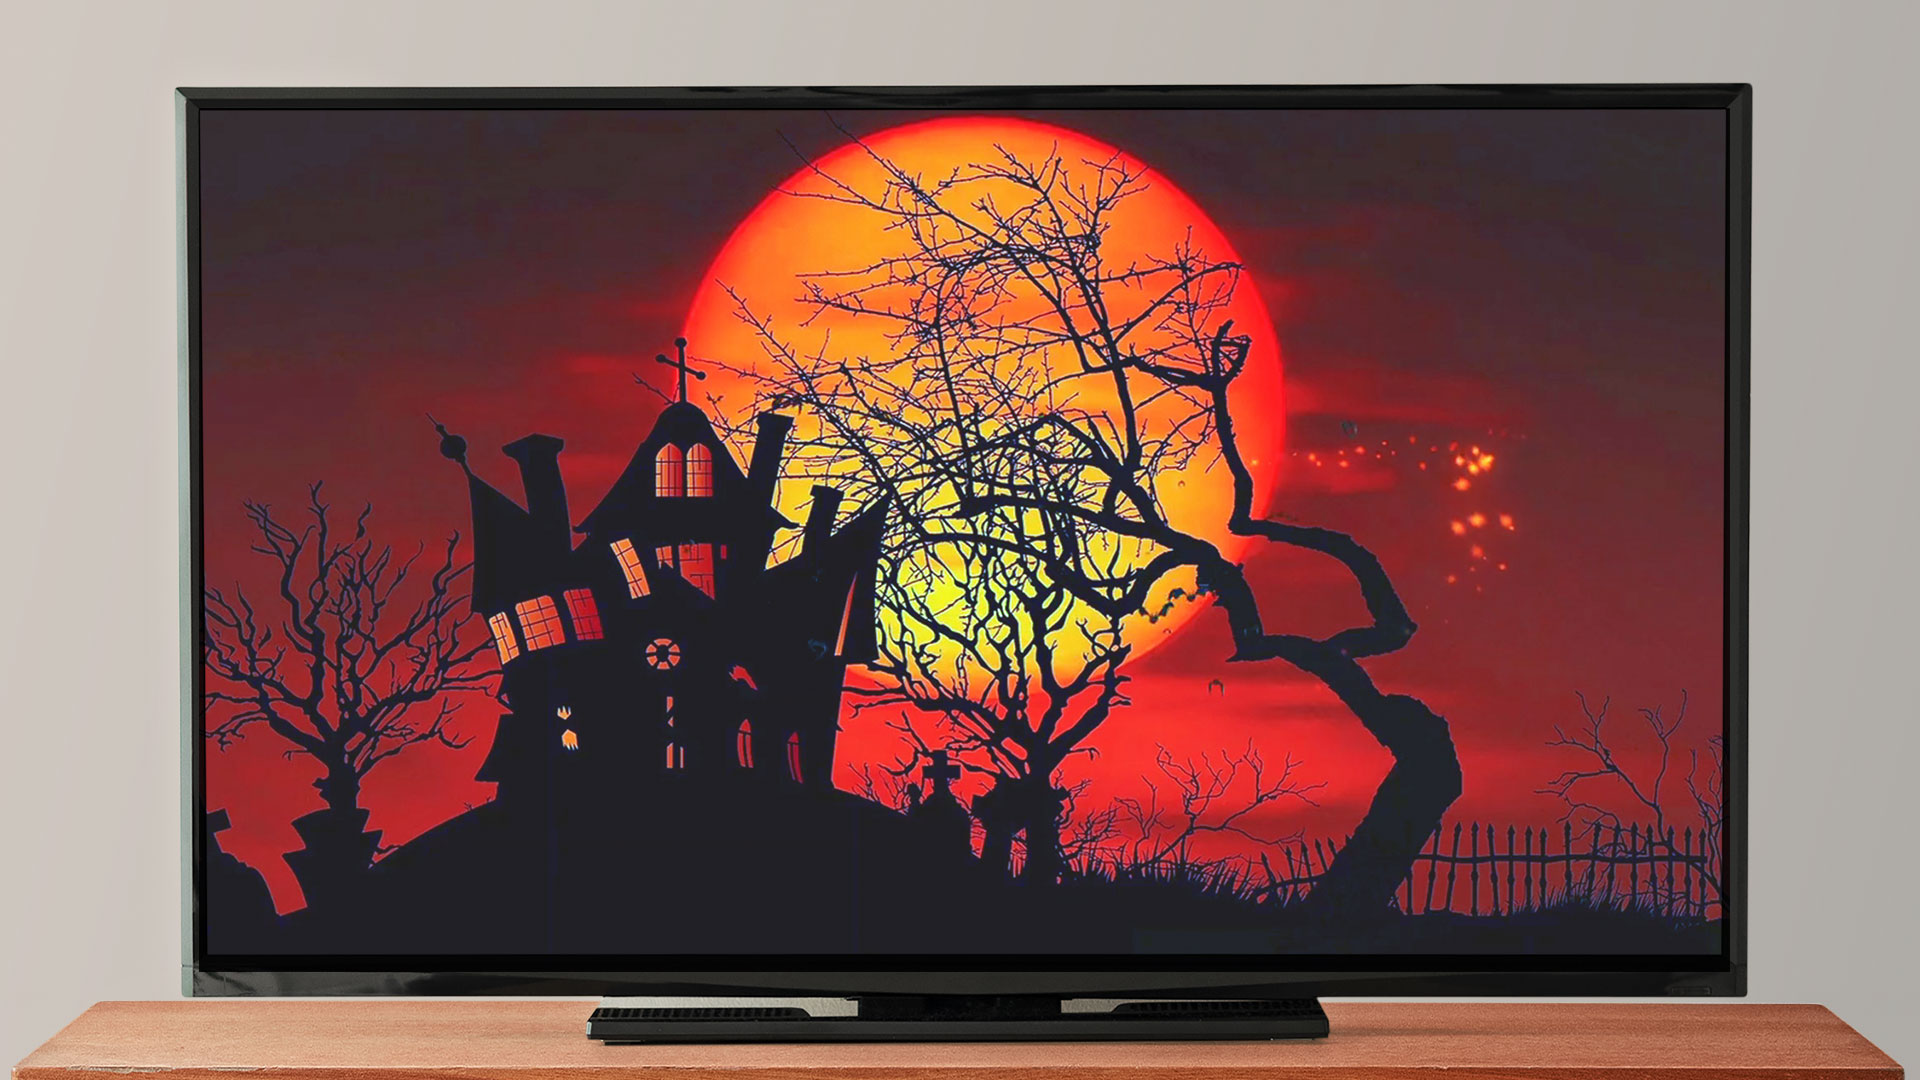 4K Halloween music: Spooky particles, Haunted house, creepy music, Screensaver Background 9 Videos For Tablets And Fire TV - NO ADS